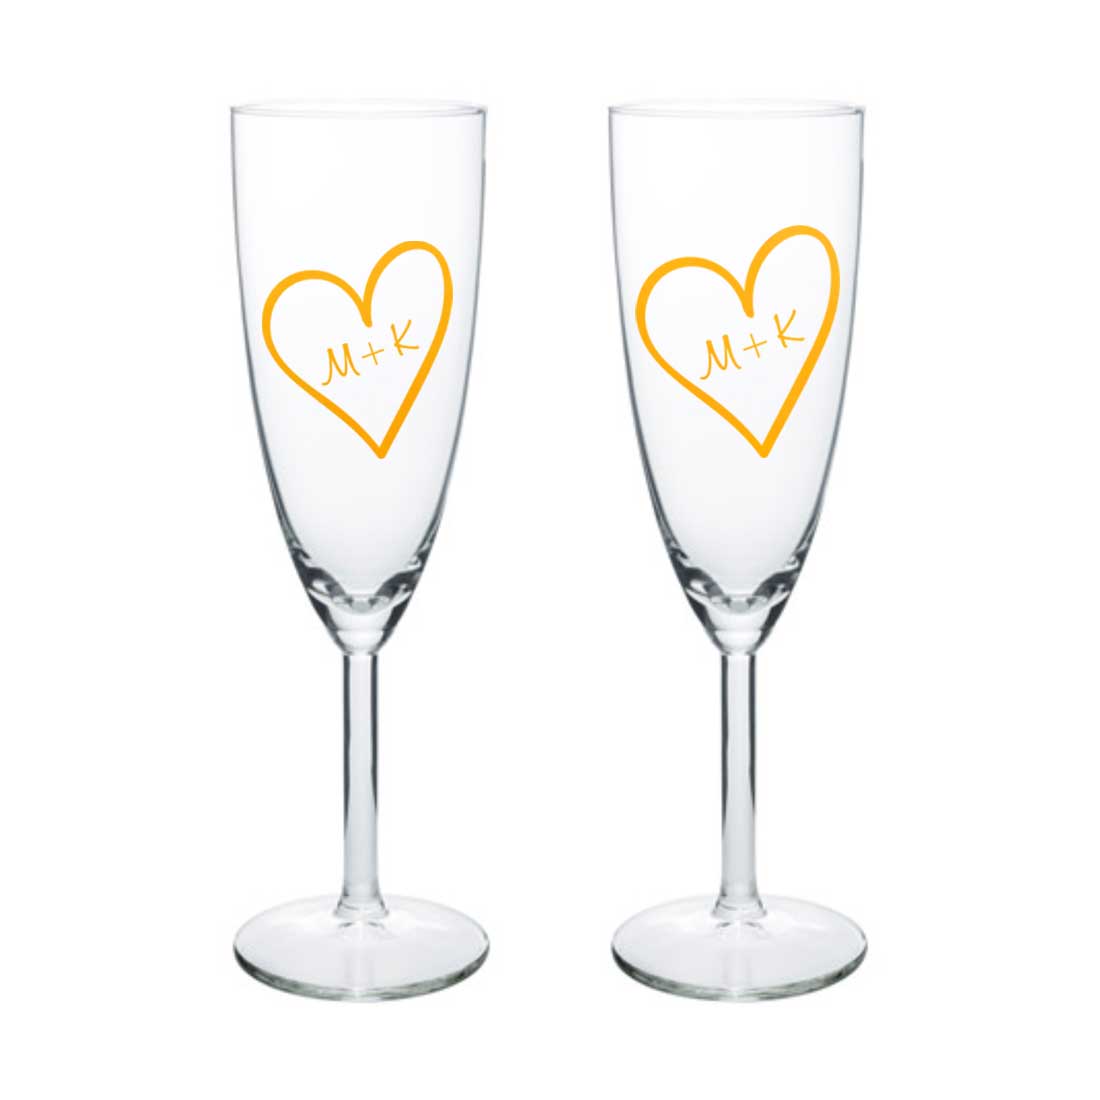 Personalised Champagne Glasses Flute Glass Set of 2  Anniversary Gift Idea  - Sweethearts